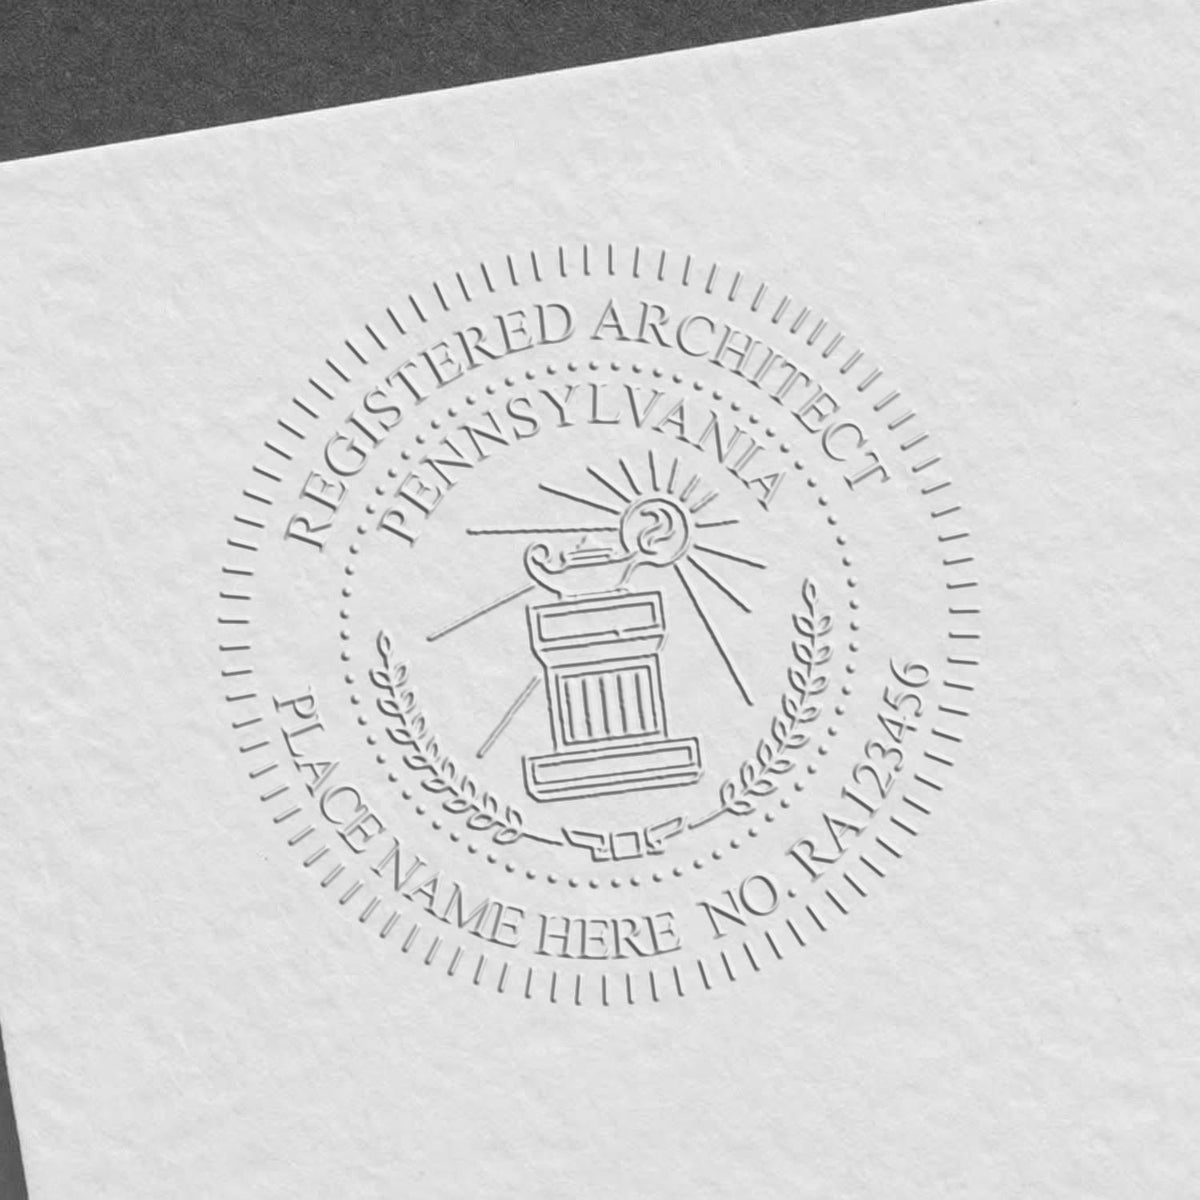 The Gift Pennsylvania Architect Seal stamp impression comes to life with a crisp, detailed image stamped on paper - showcasing true professional quality.